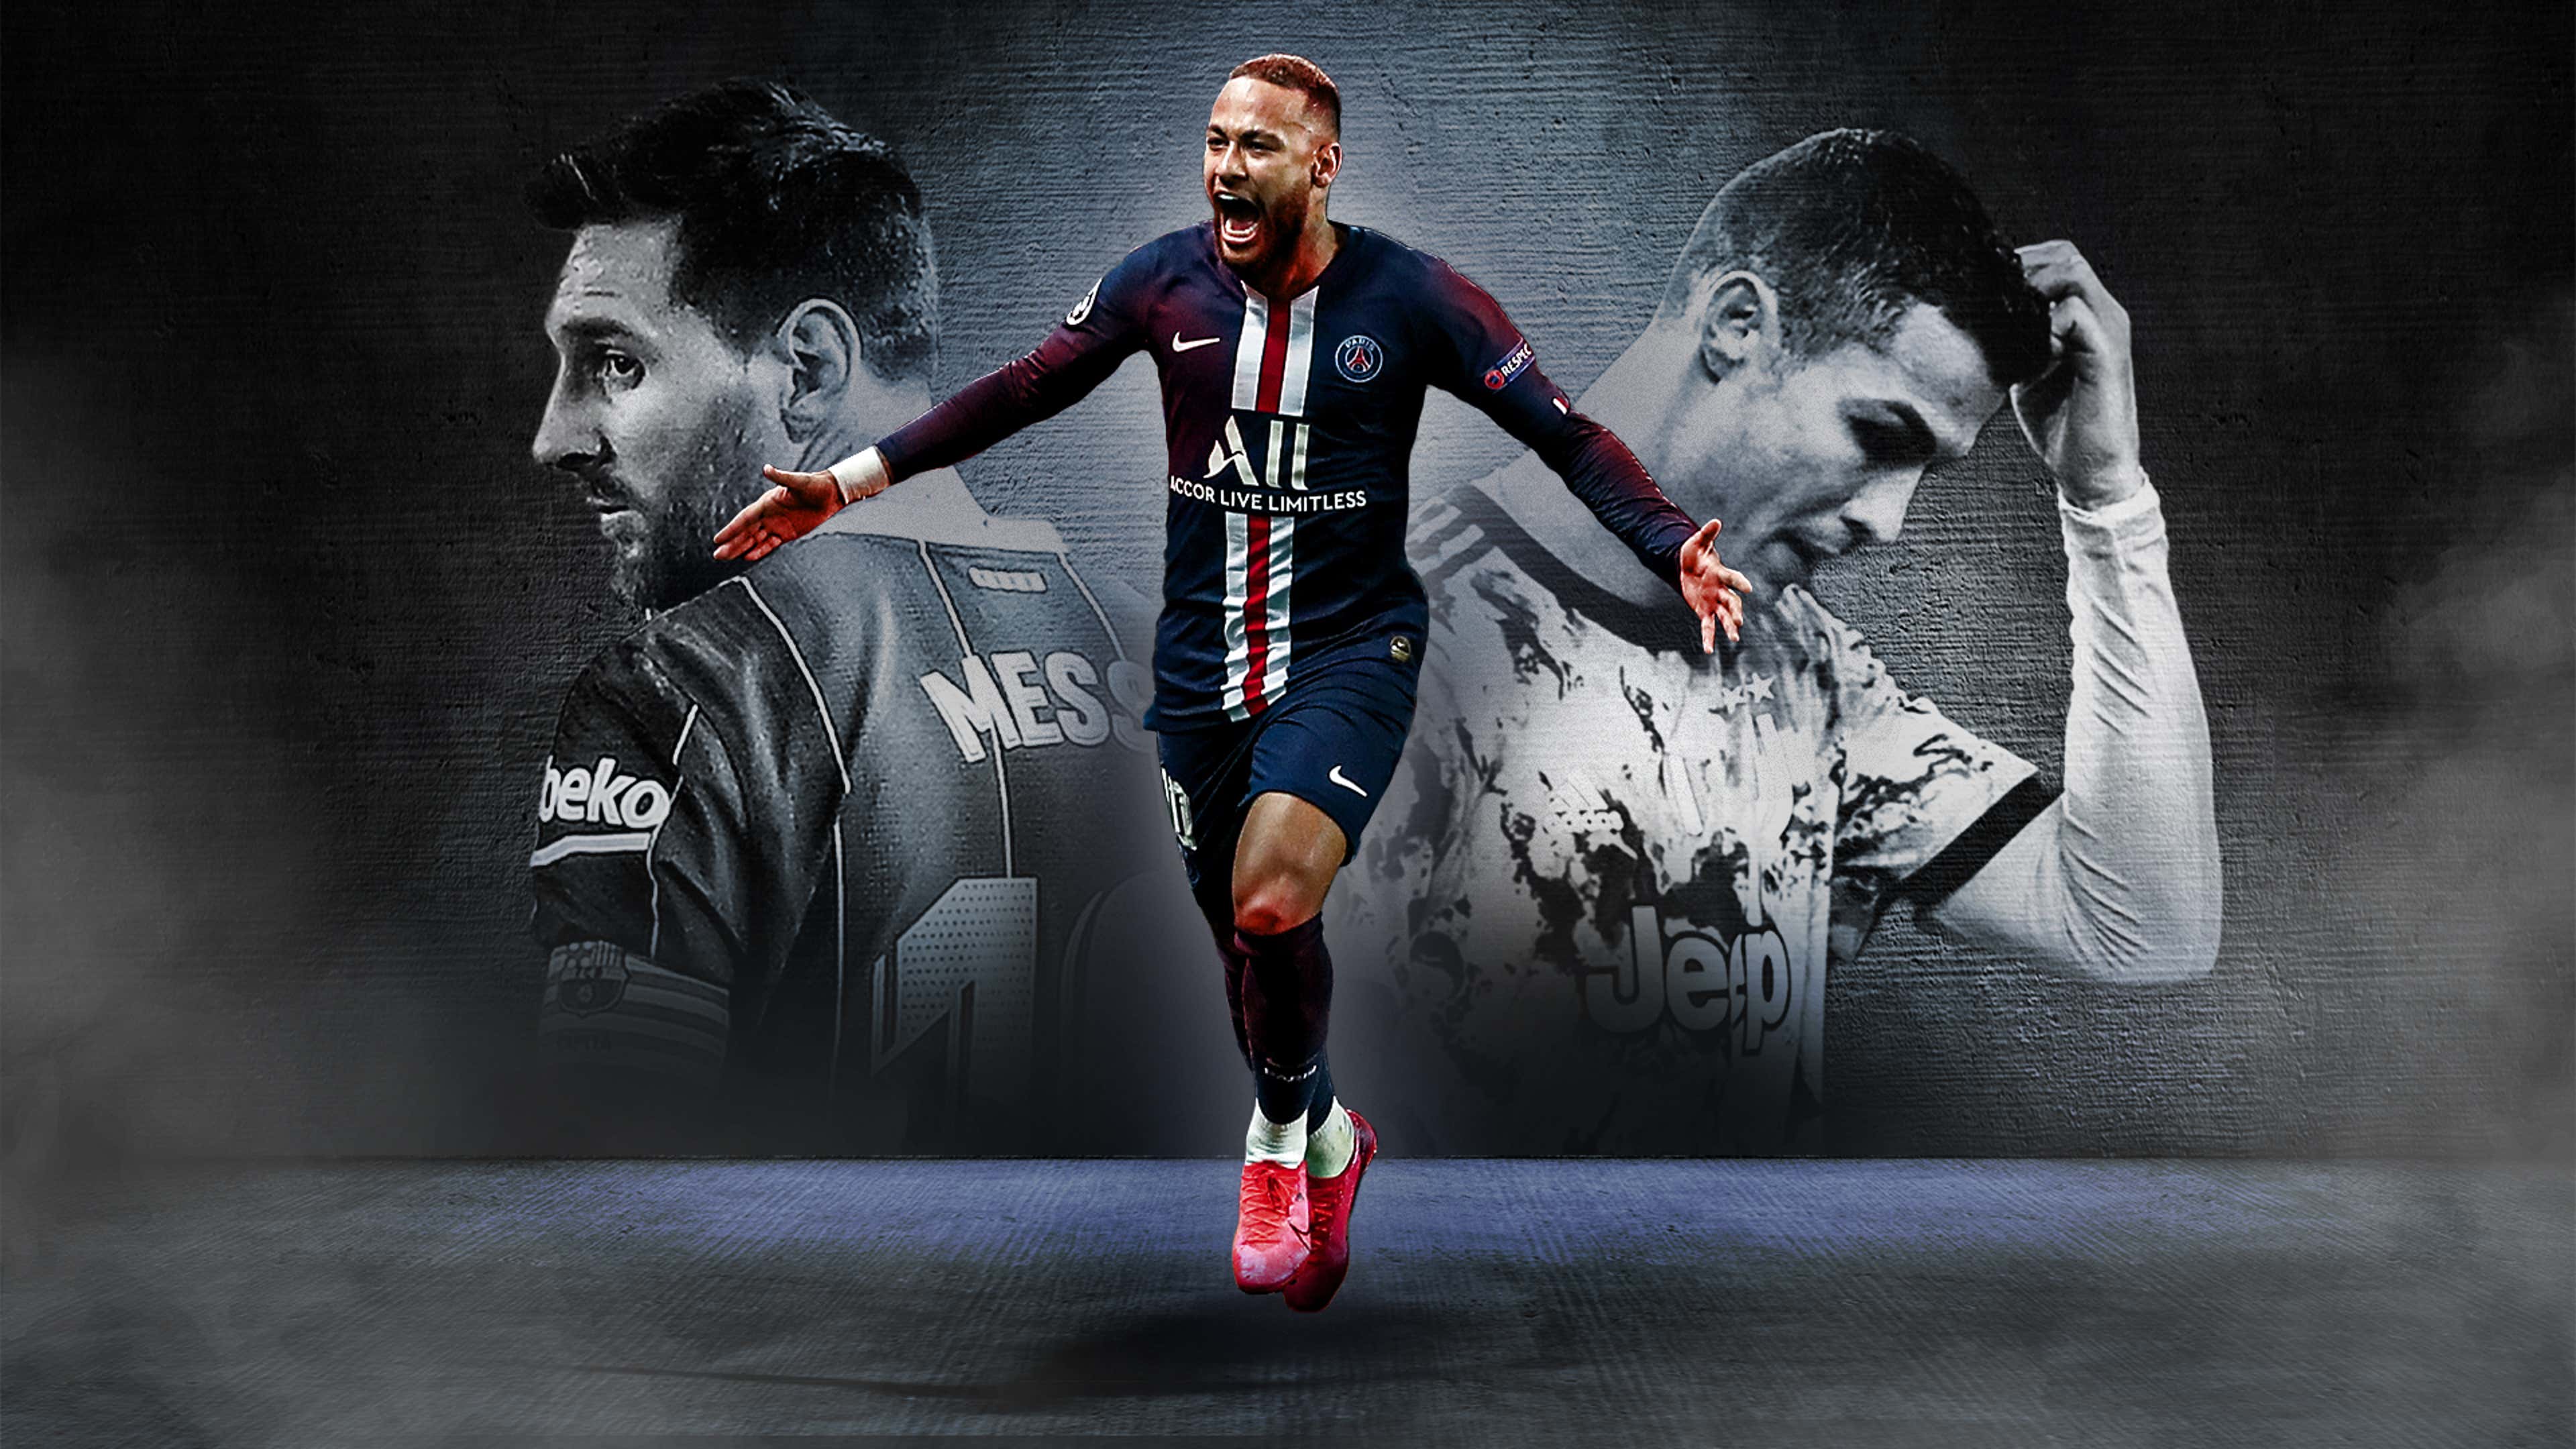 No Messi, no Ronaldo: Champions League stage set for Neymar to prove he's  still Ballon d'Or-worthy